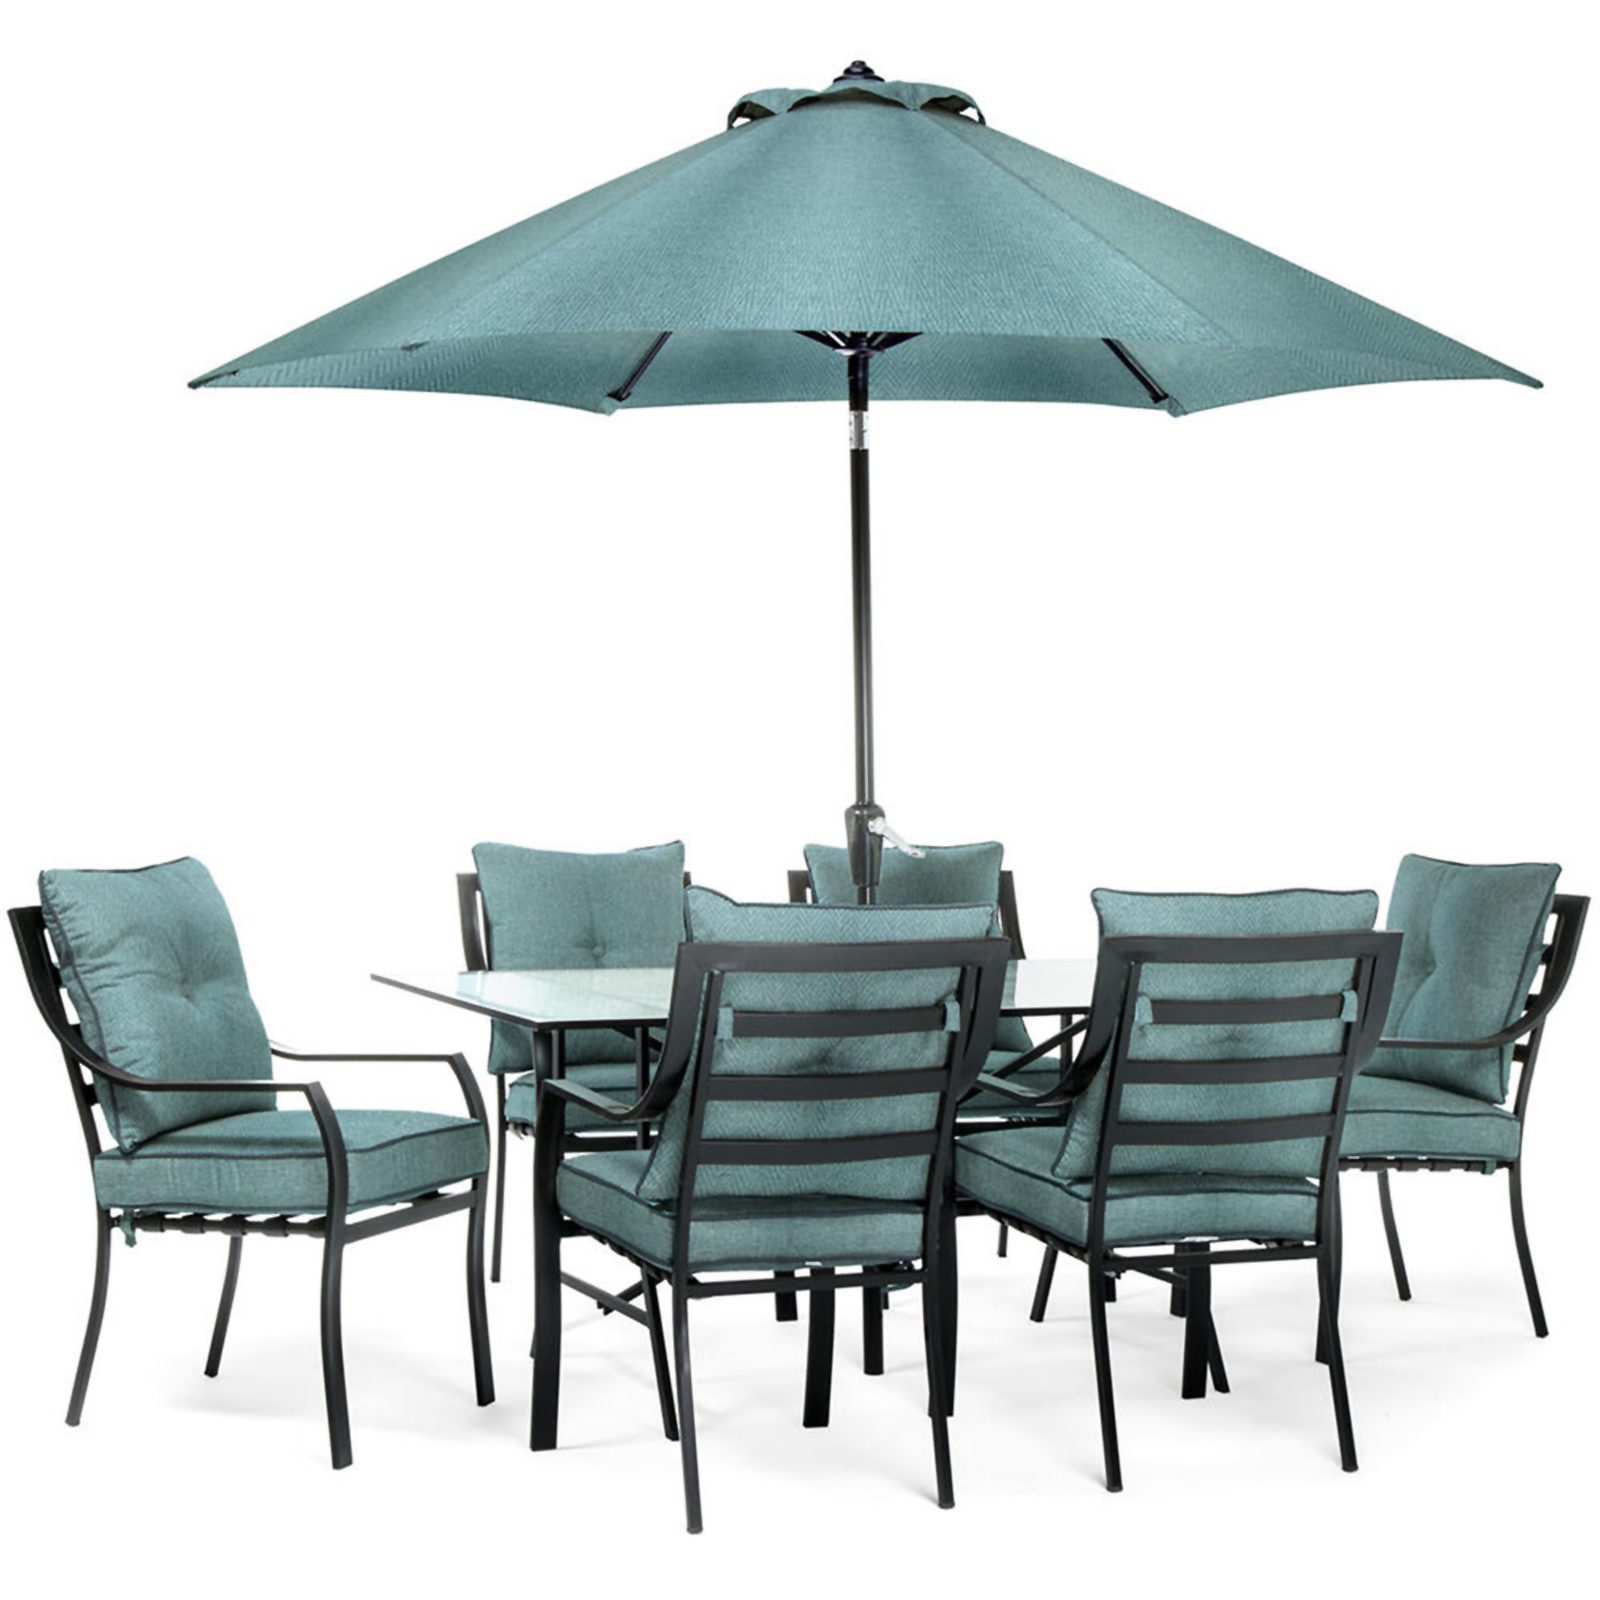 Hanover Lavallette 7pc. Metal Outdoor Dining Set with Umbrella  - Ocean Blue